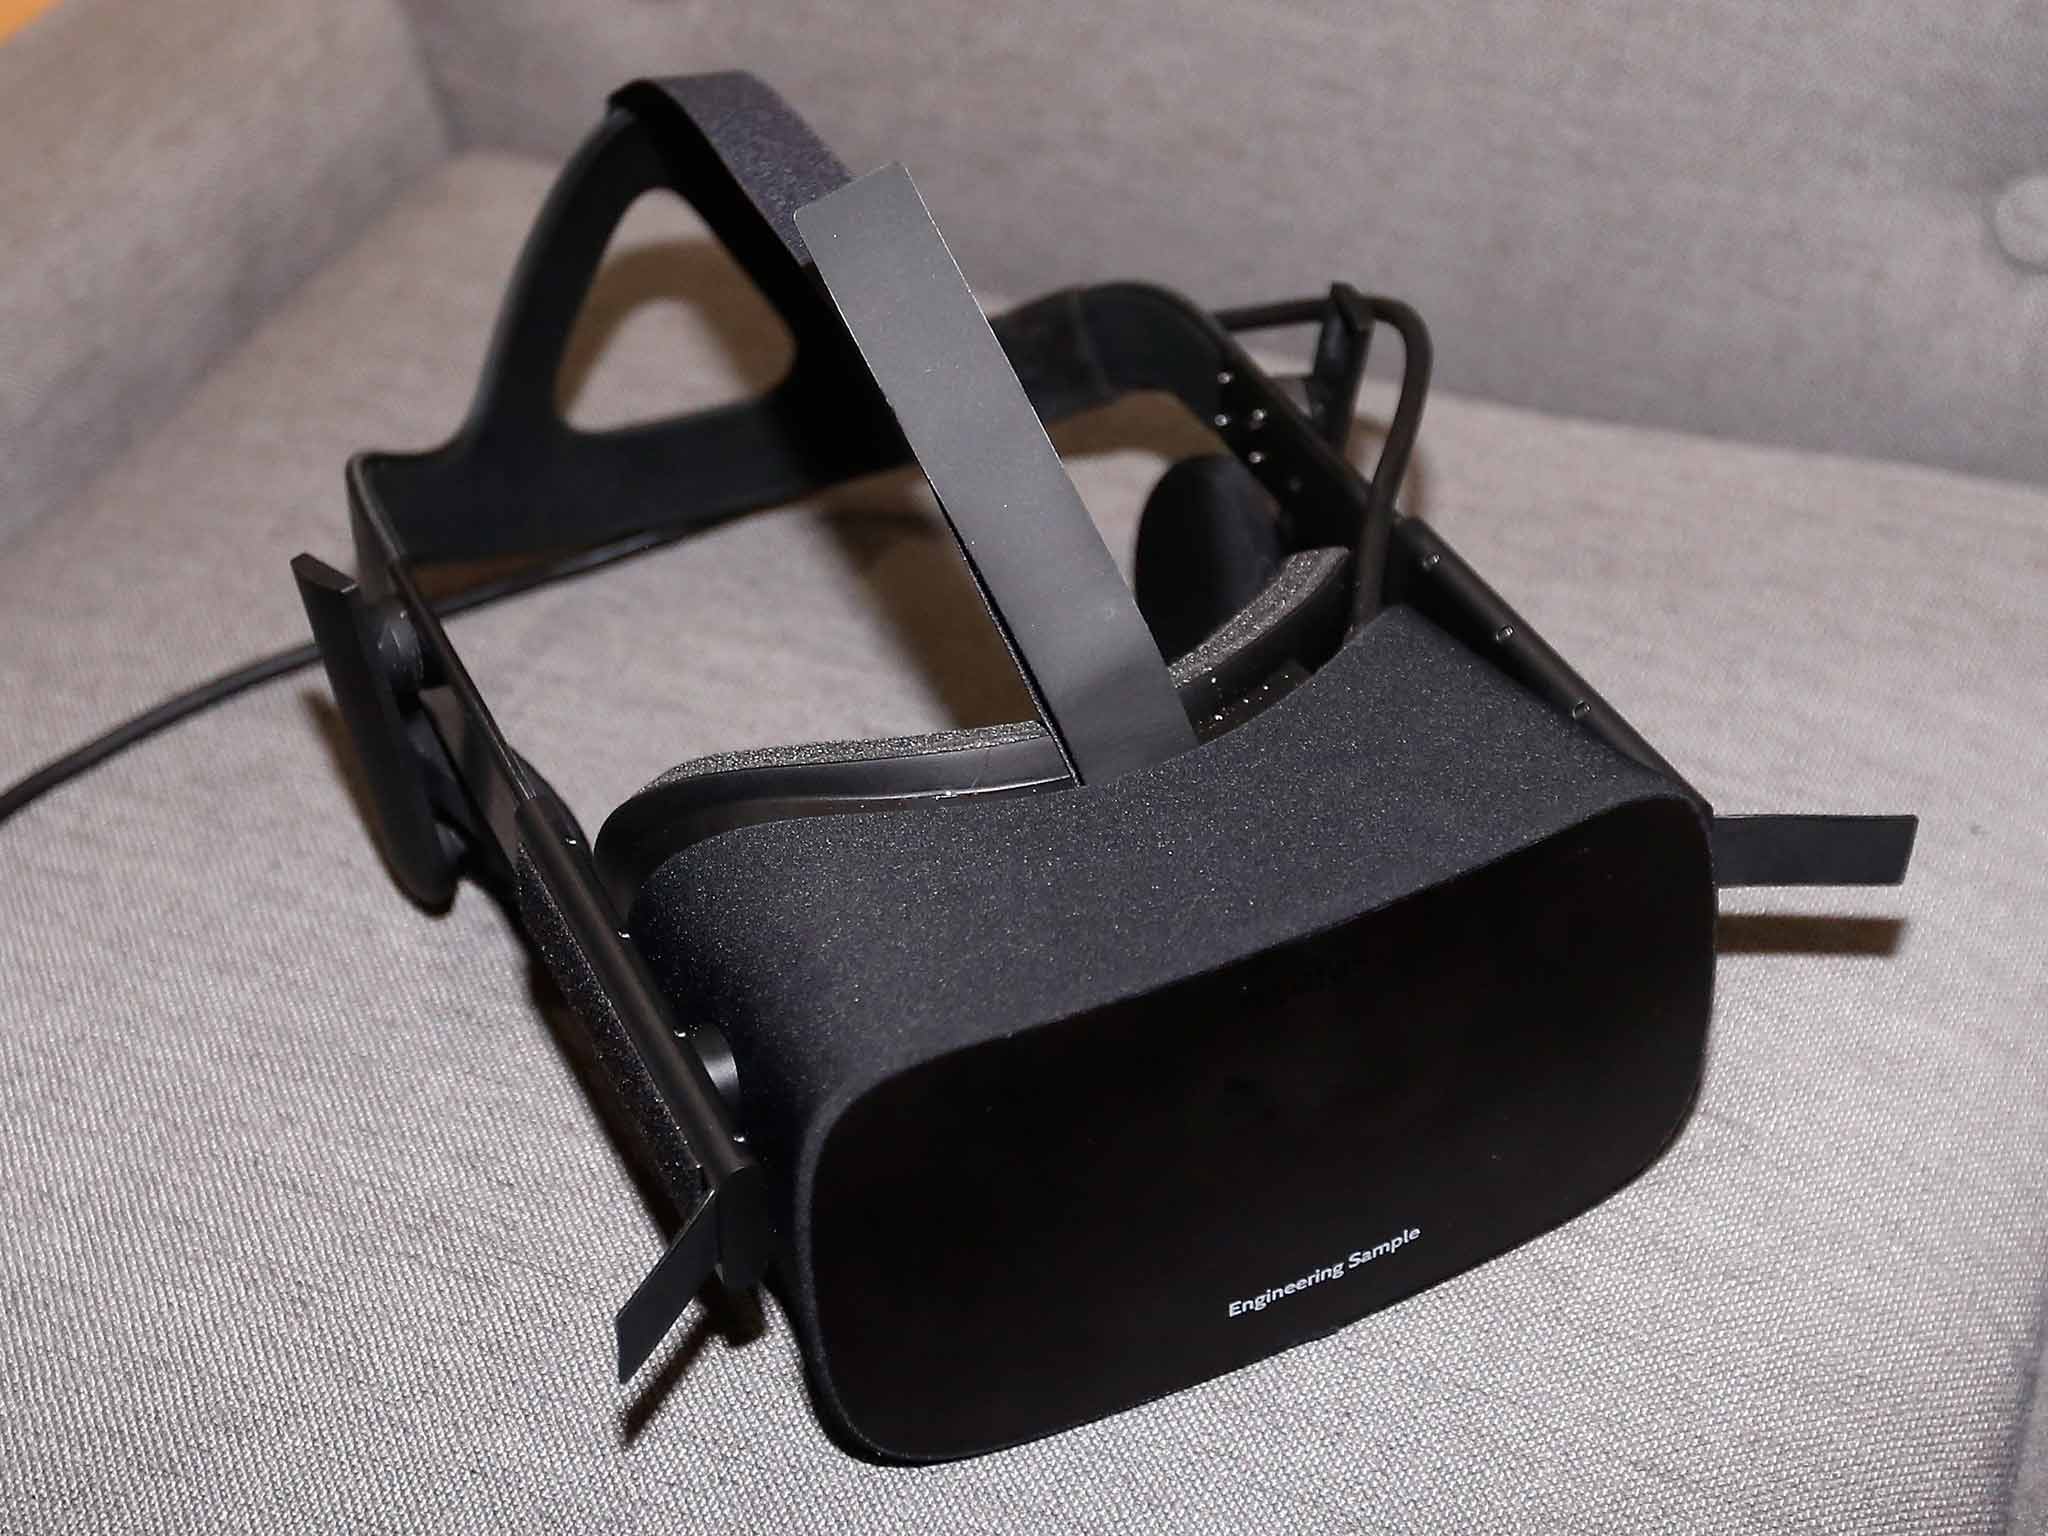 Oculus Rift price: Company apologises for its reality headset so expensive | The Independent The Independent